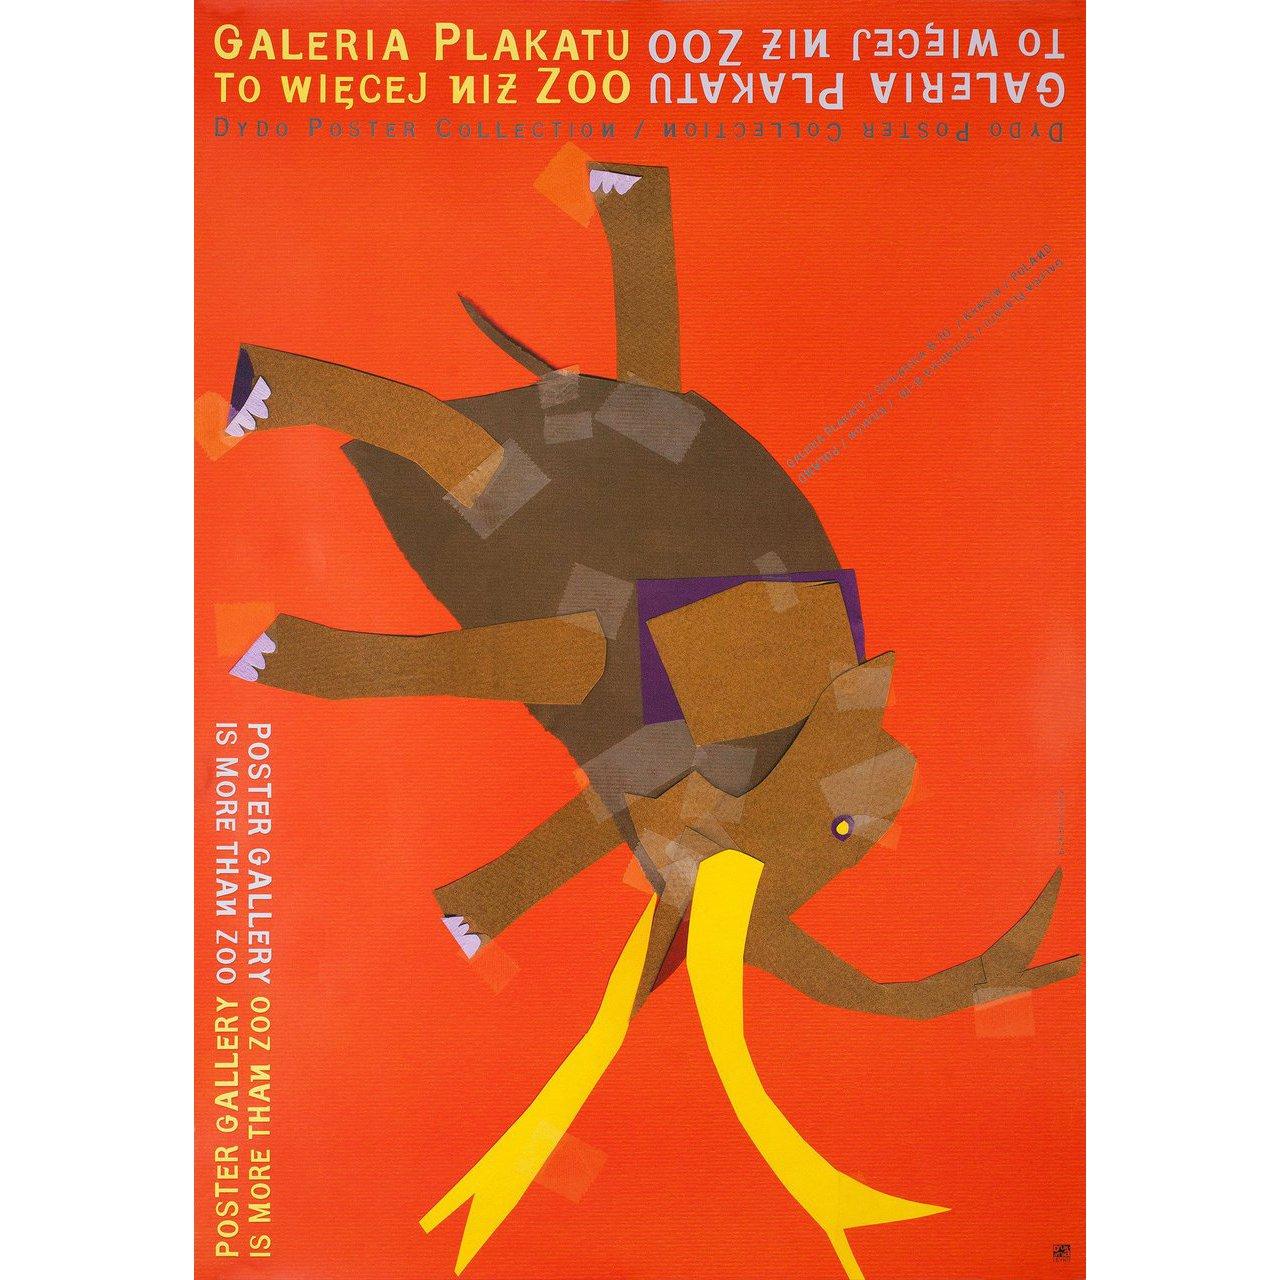 Original 2000s Polish B1 poster by Elzbieta Chojna for the exhibition Poster Gallery Is More than Zoo. Fine condition, folded. Many original posters were issued folded or were subsequently folded. Please note: the size is stated in inches and the